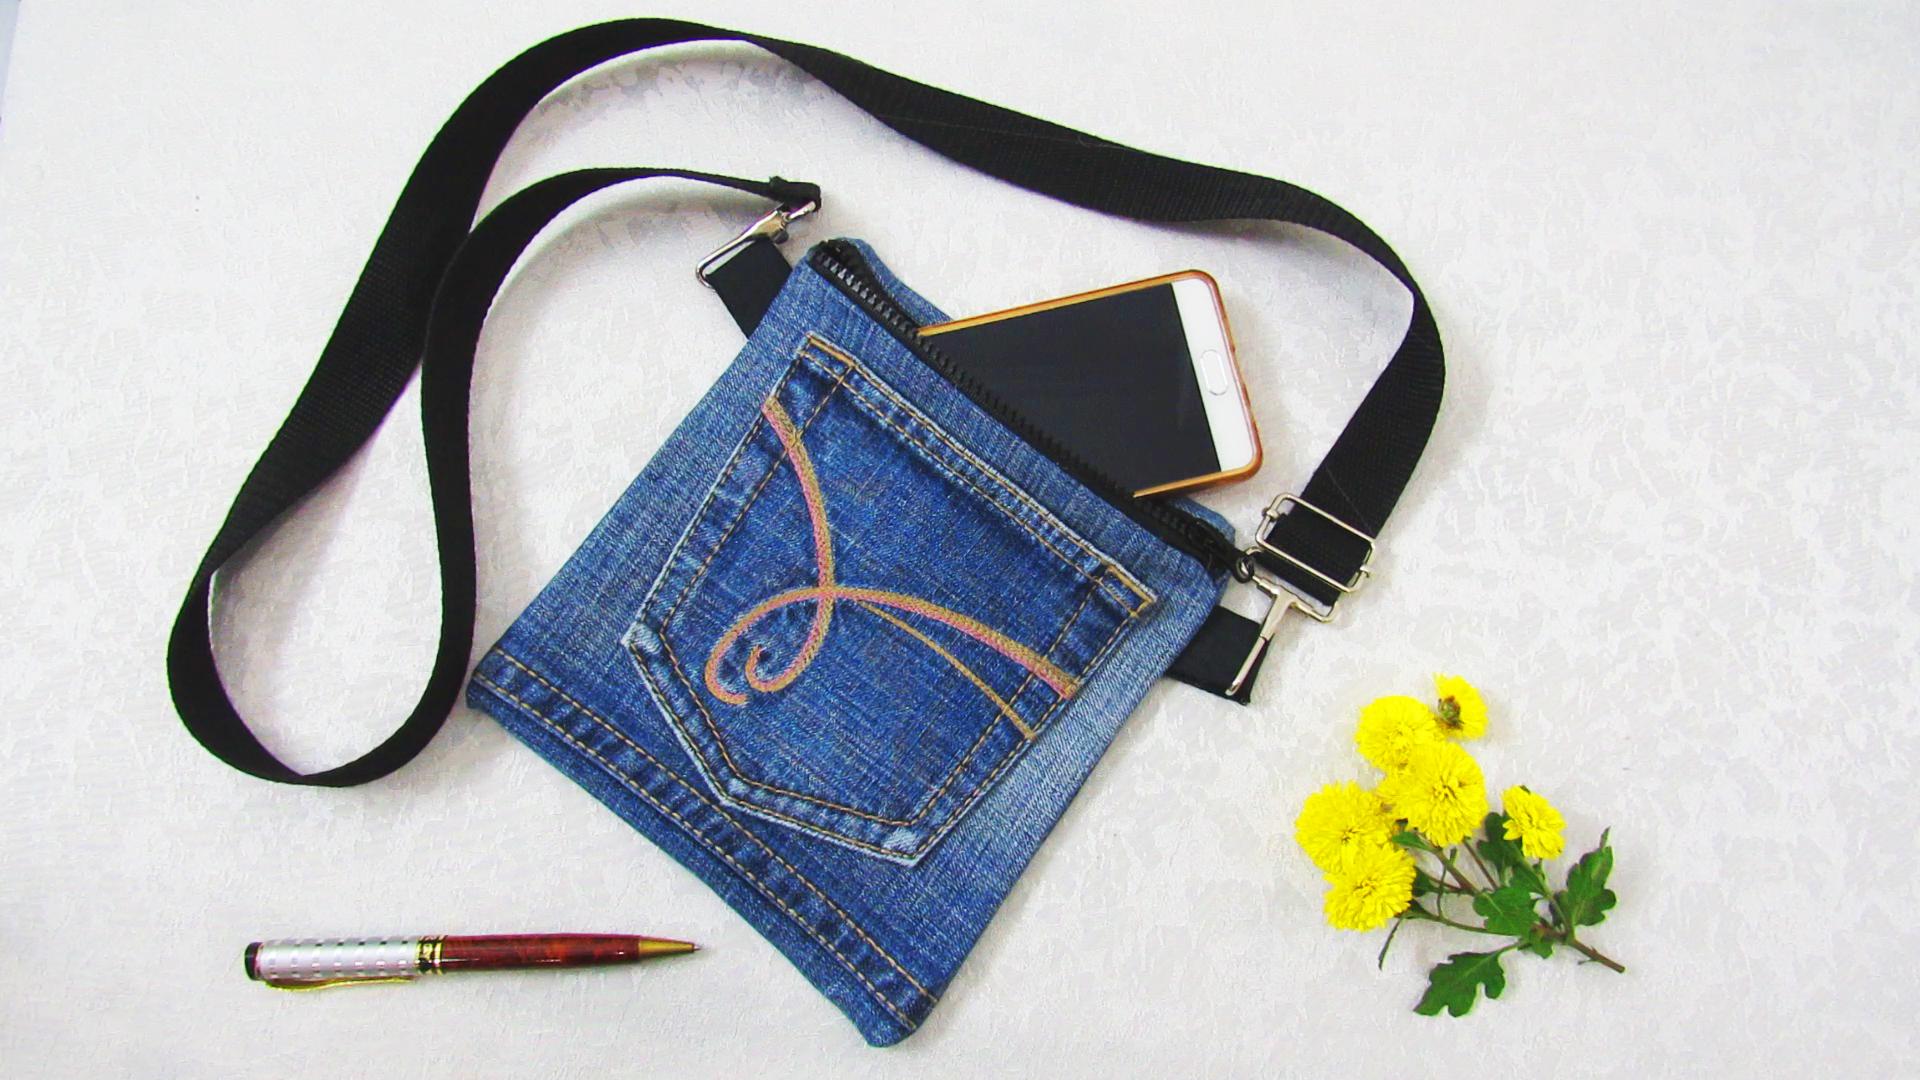 How to make lovely Zipper bag Purse from old jeans in 10 minutes